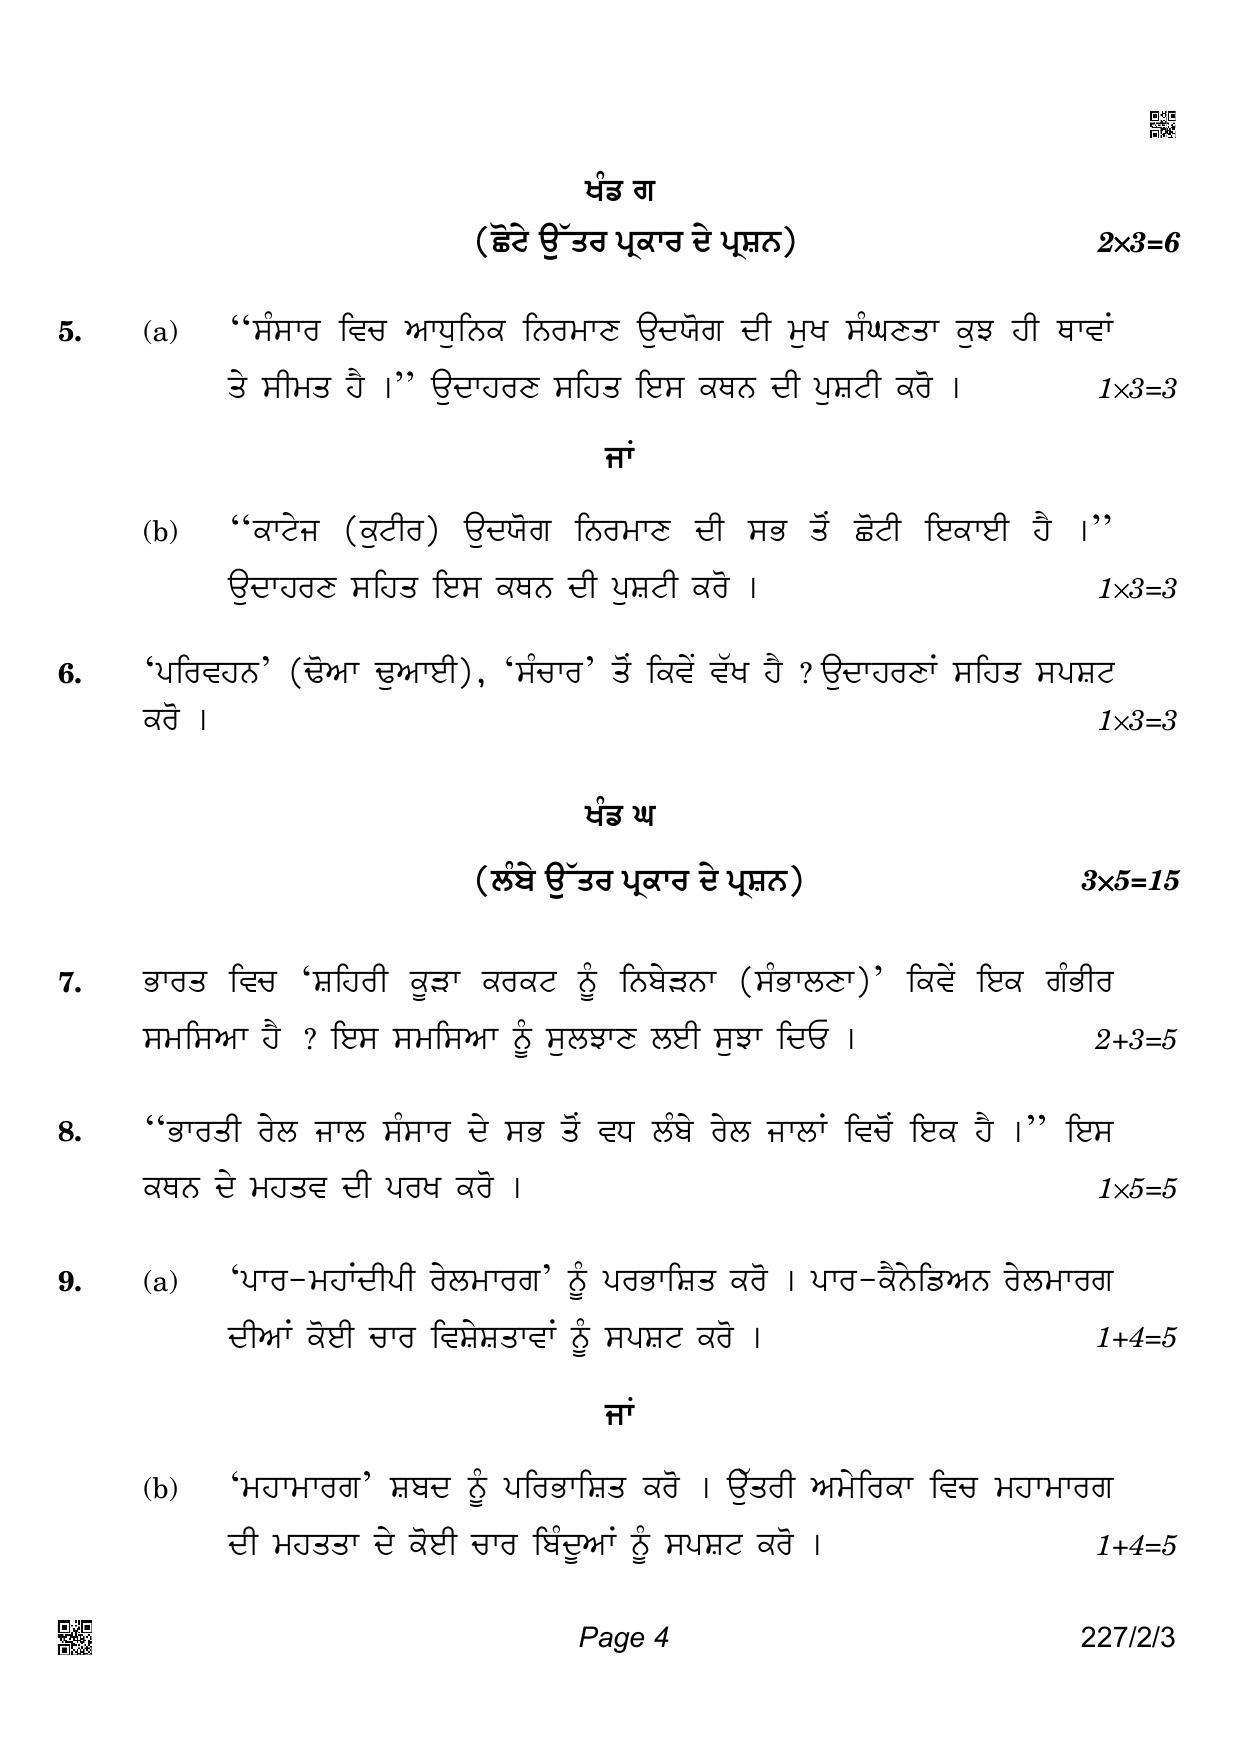 CBSE Class 12 227-2-3 Geography  Punjabi Version 2022 Question Paper - Page 4